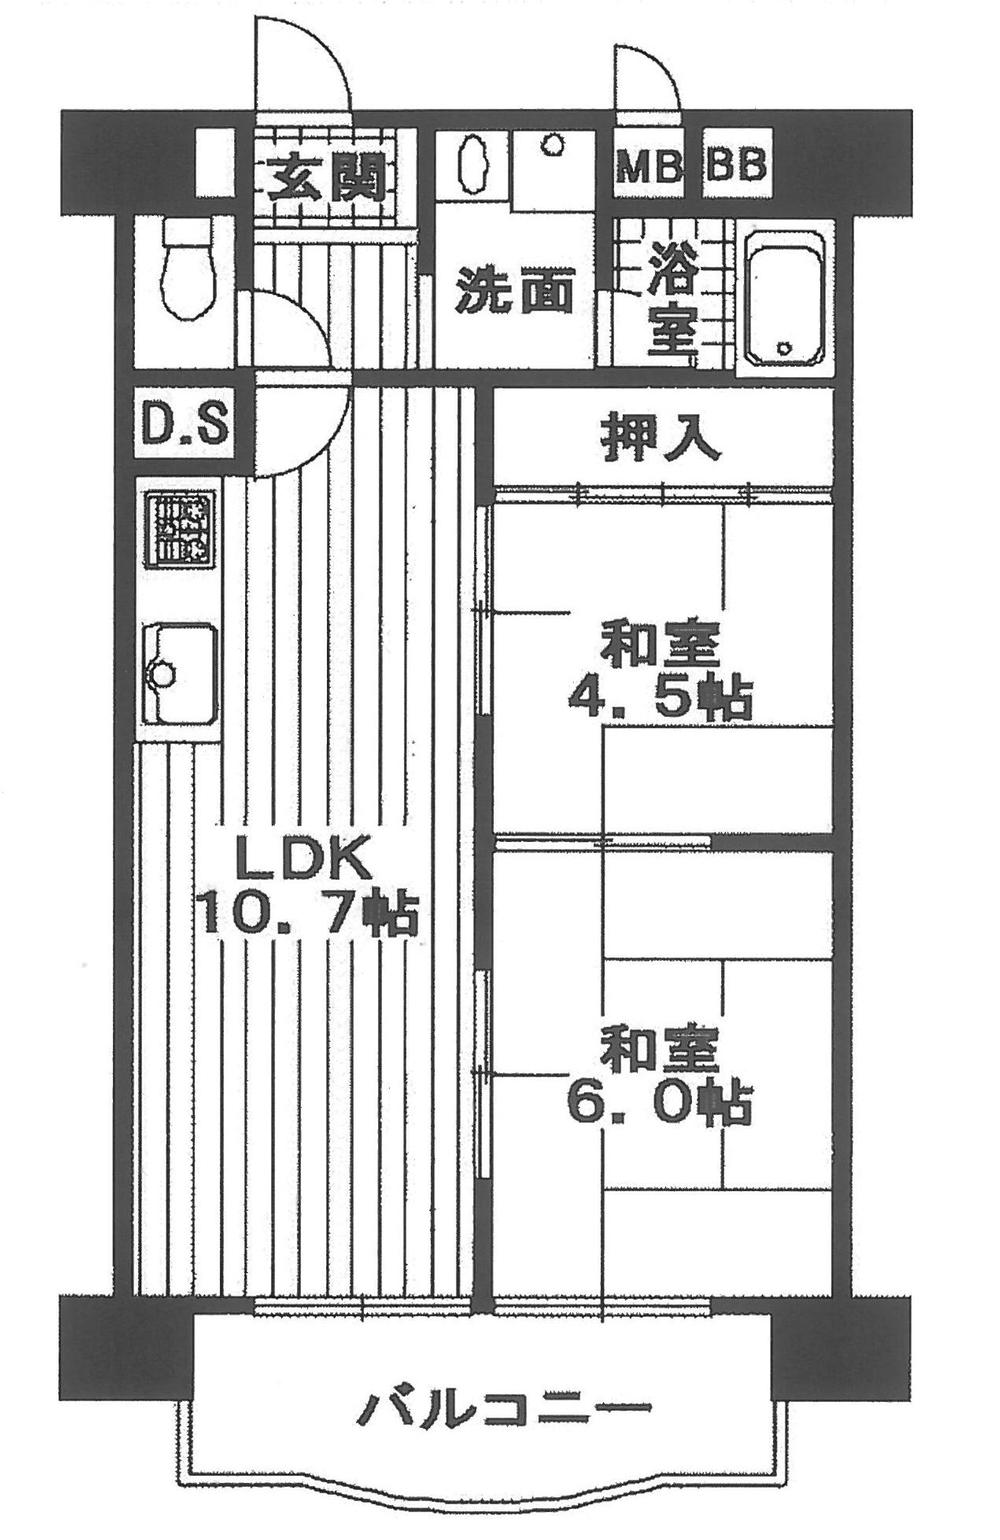 Floor plan. 2LDK, Price 13,900,000 yen, Occupied area 49.41 sq m , Balcony area 4.8 sq m 2013 mid-November LDK flooring had made, 2013 late September renovated (system Kitchen ・ unit bus ・ With TV monitor interphone ・ Bathroom vanity ・ Washlet had made, Wall cross Chokawa ・ Tatami mat replacement ・ House cleaning, etc.